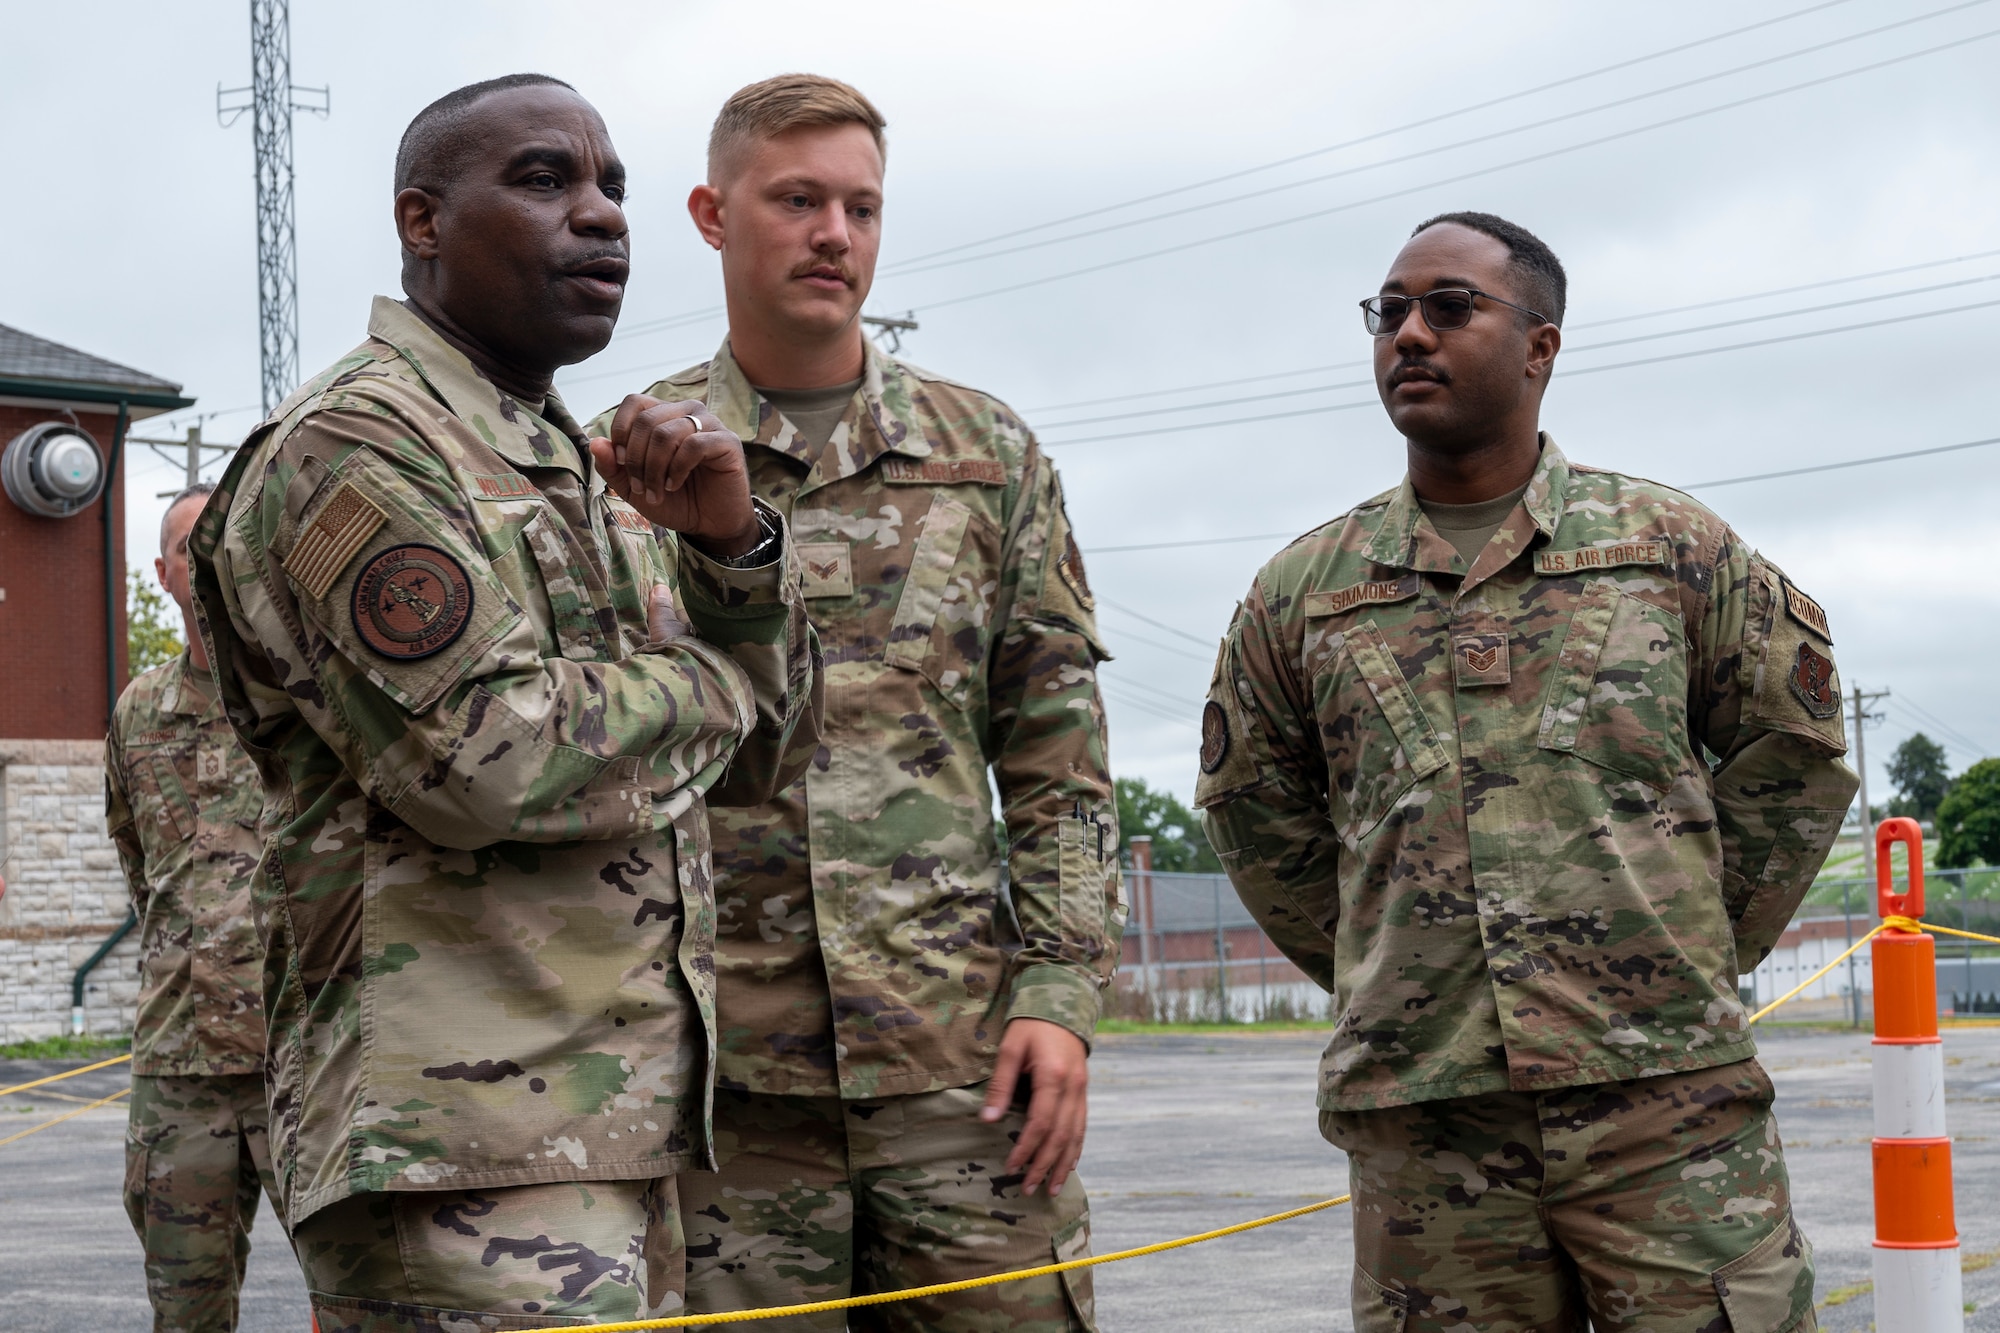 U.S. Air Force Chief Master Sgt. Maurice Williams, right, command chief, Air National Guard, speaks with Senior Airman Jaxson Ziemann and Staff Sgt. Jerone Simmons, both assigned to the 239th Combat Communications Squadron, 131st Bomb Wing, Missouri National Guard at Jefferson Barracks Air National Guard Base, St. Louis, Missouri, Sept. 11, 2022. During his visit, Williams spoke with leadership and Airmen about the importance of the mission, leadership qualities and the Airmen's impact on the future of the Air Force. (U.S. Air National Guard photo by Senior Airman Whitney Erhart)